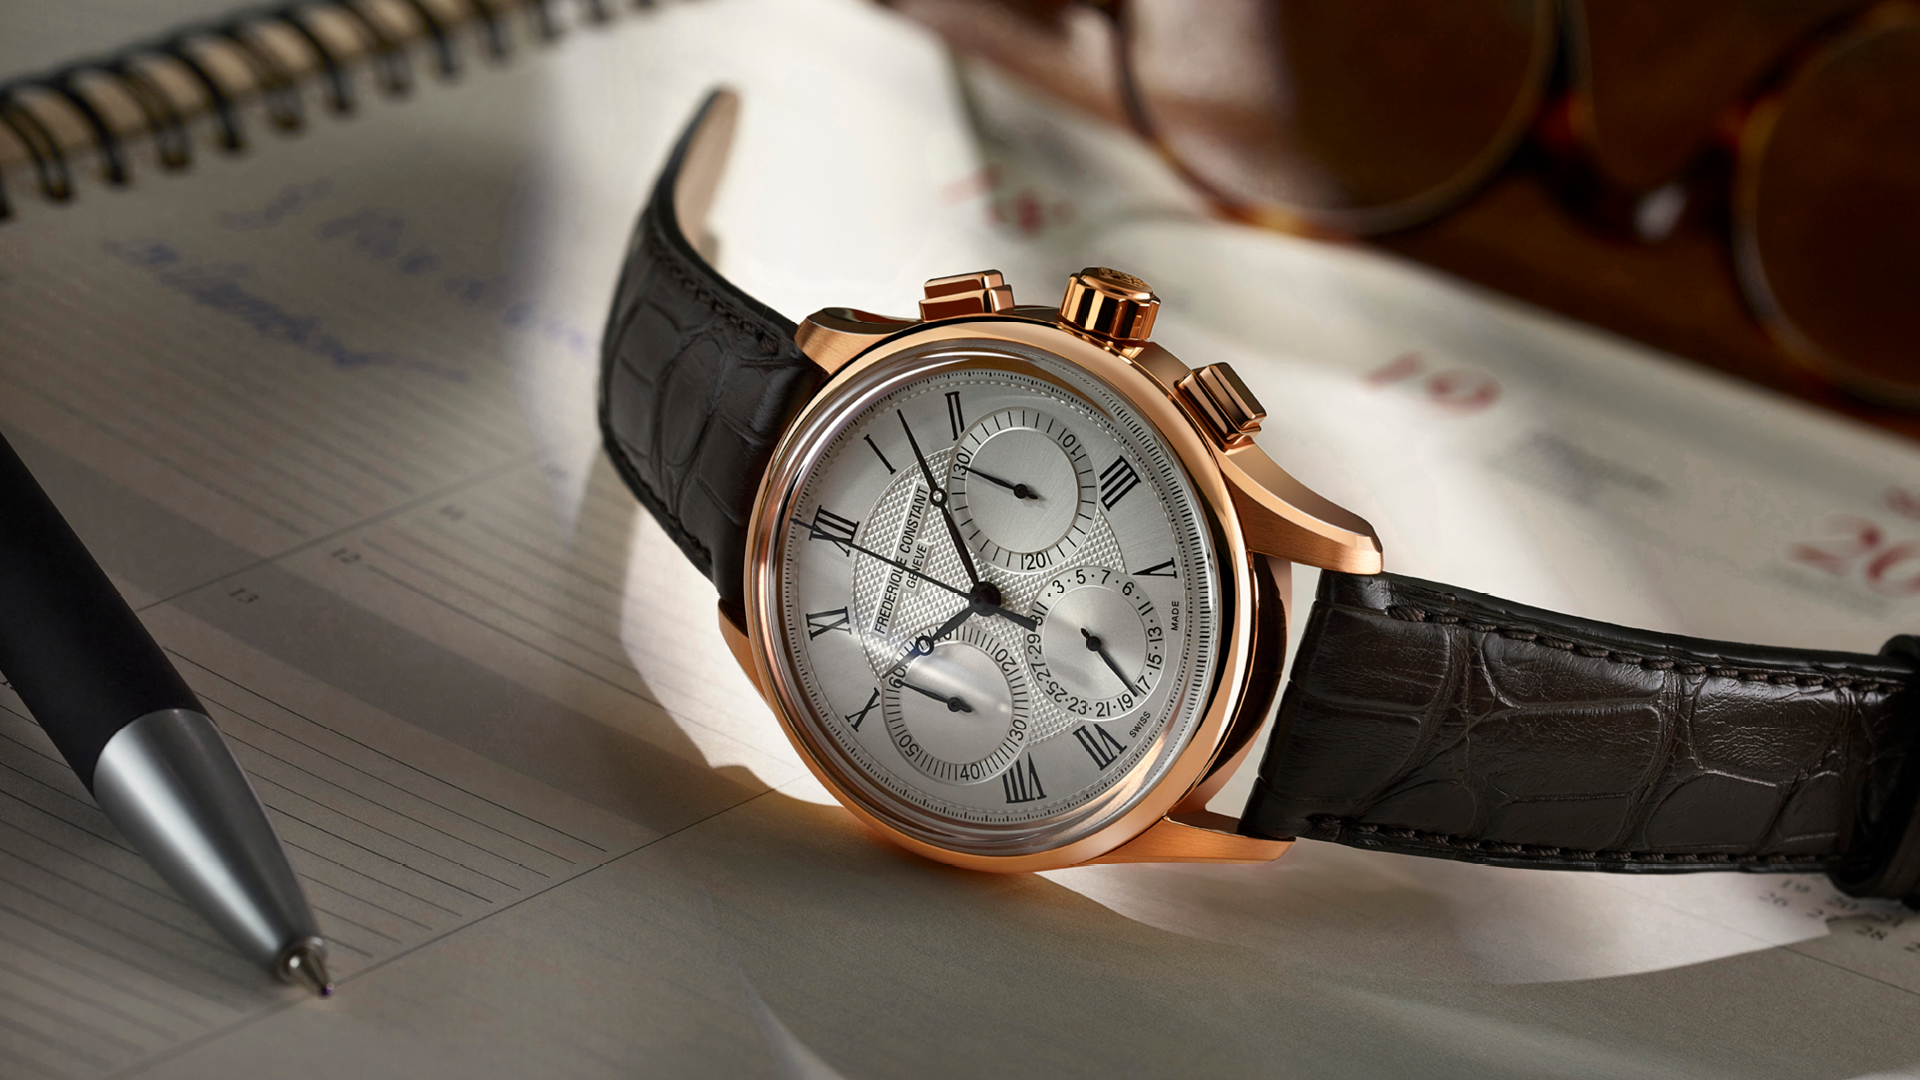 Flyback Chronograph Manufacture watch for man. Automatic movement, white dial, rose-gold plated case, date, seconds and minutes counters, chronograph and brown leather strap